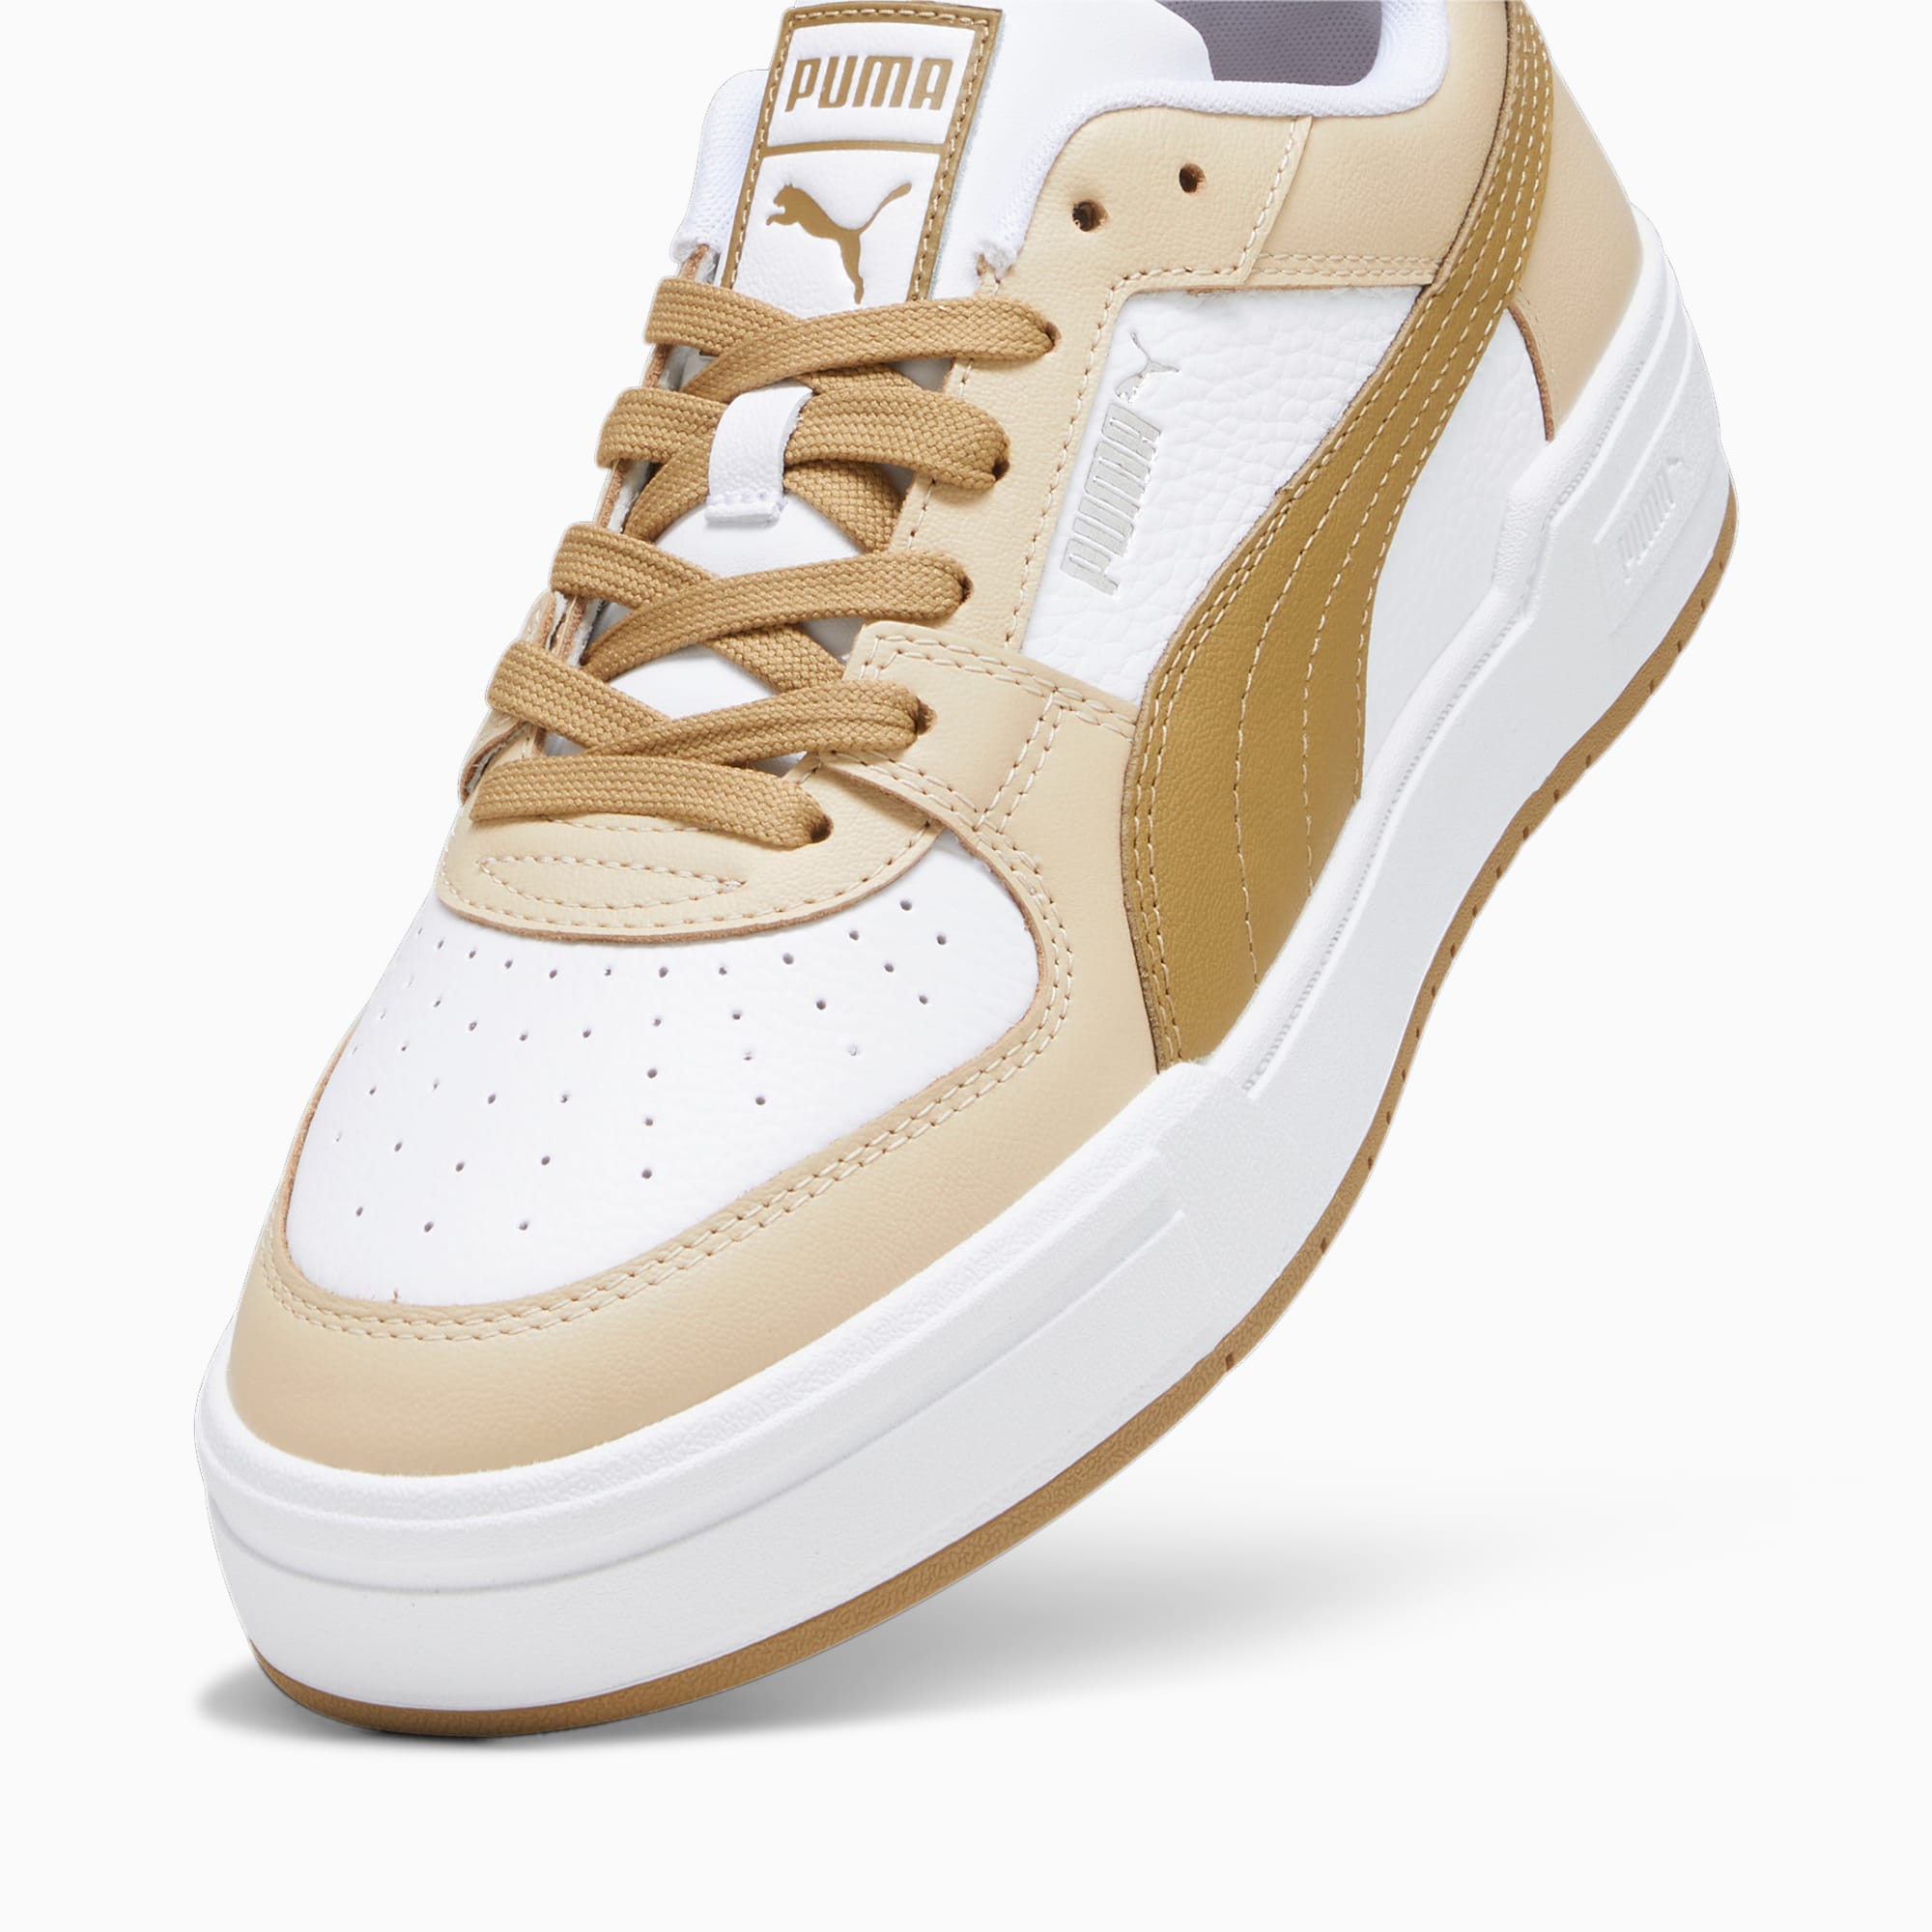 Women's PUMA Ca Pro Classic Trainers, White/Granola/Toasted, Size 37,5, Shoes